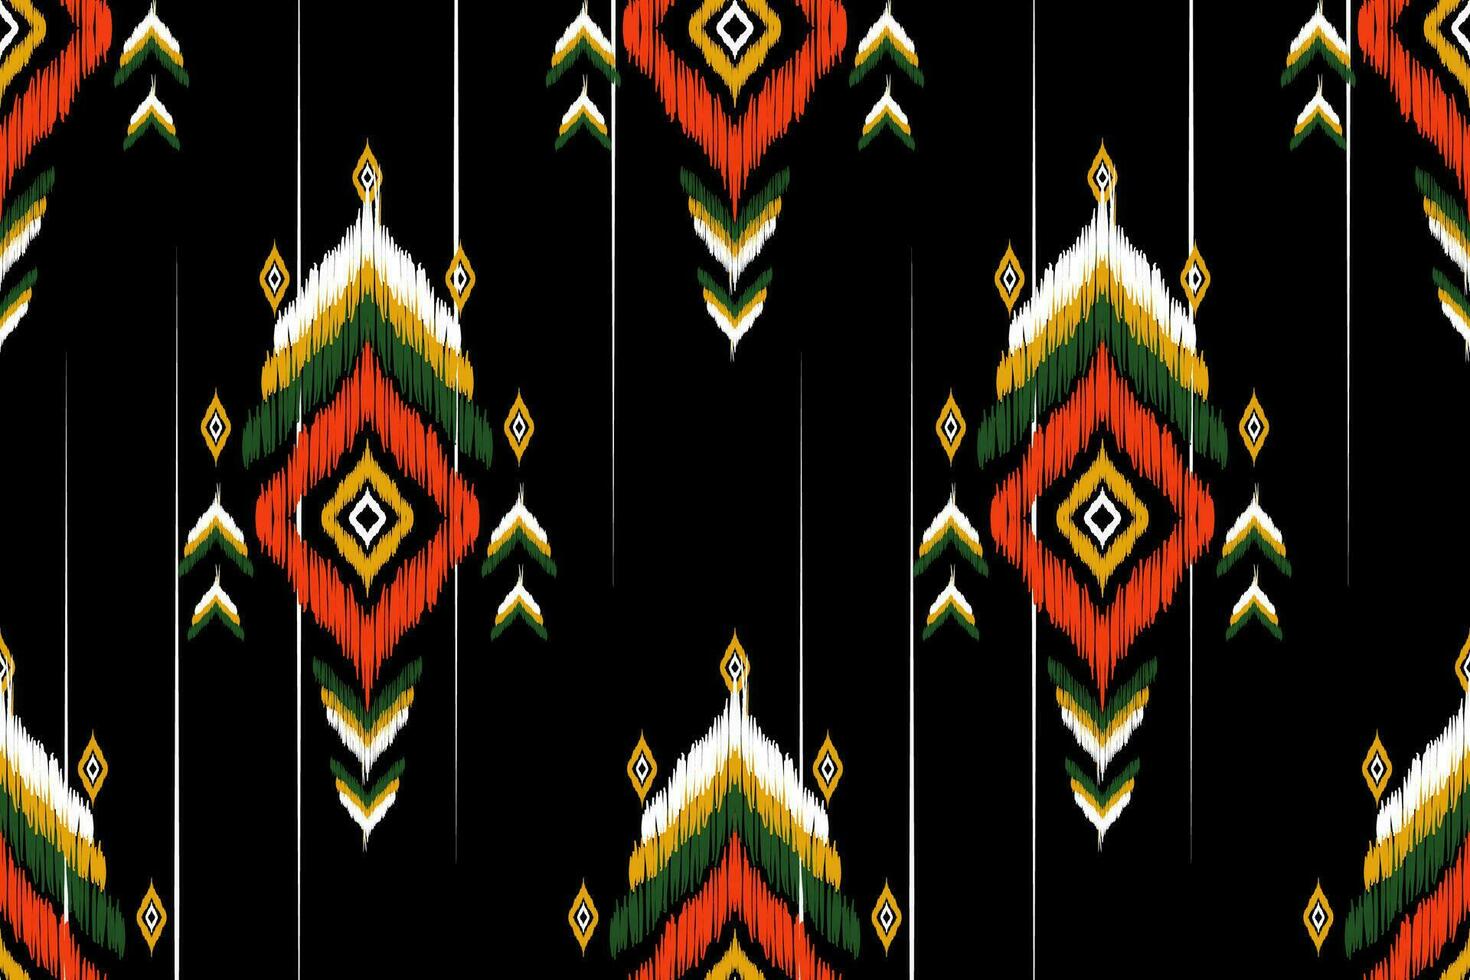 abstract geometric pattern design on black background For background or wallpaper, Ikat geometric folk ornament. Ethnic vector texture. Seamless pattern in Aztec style.